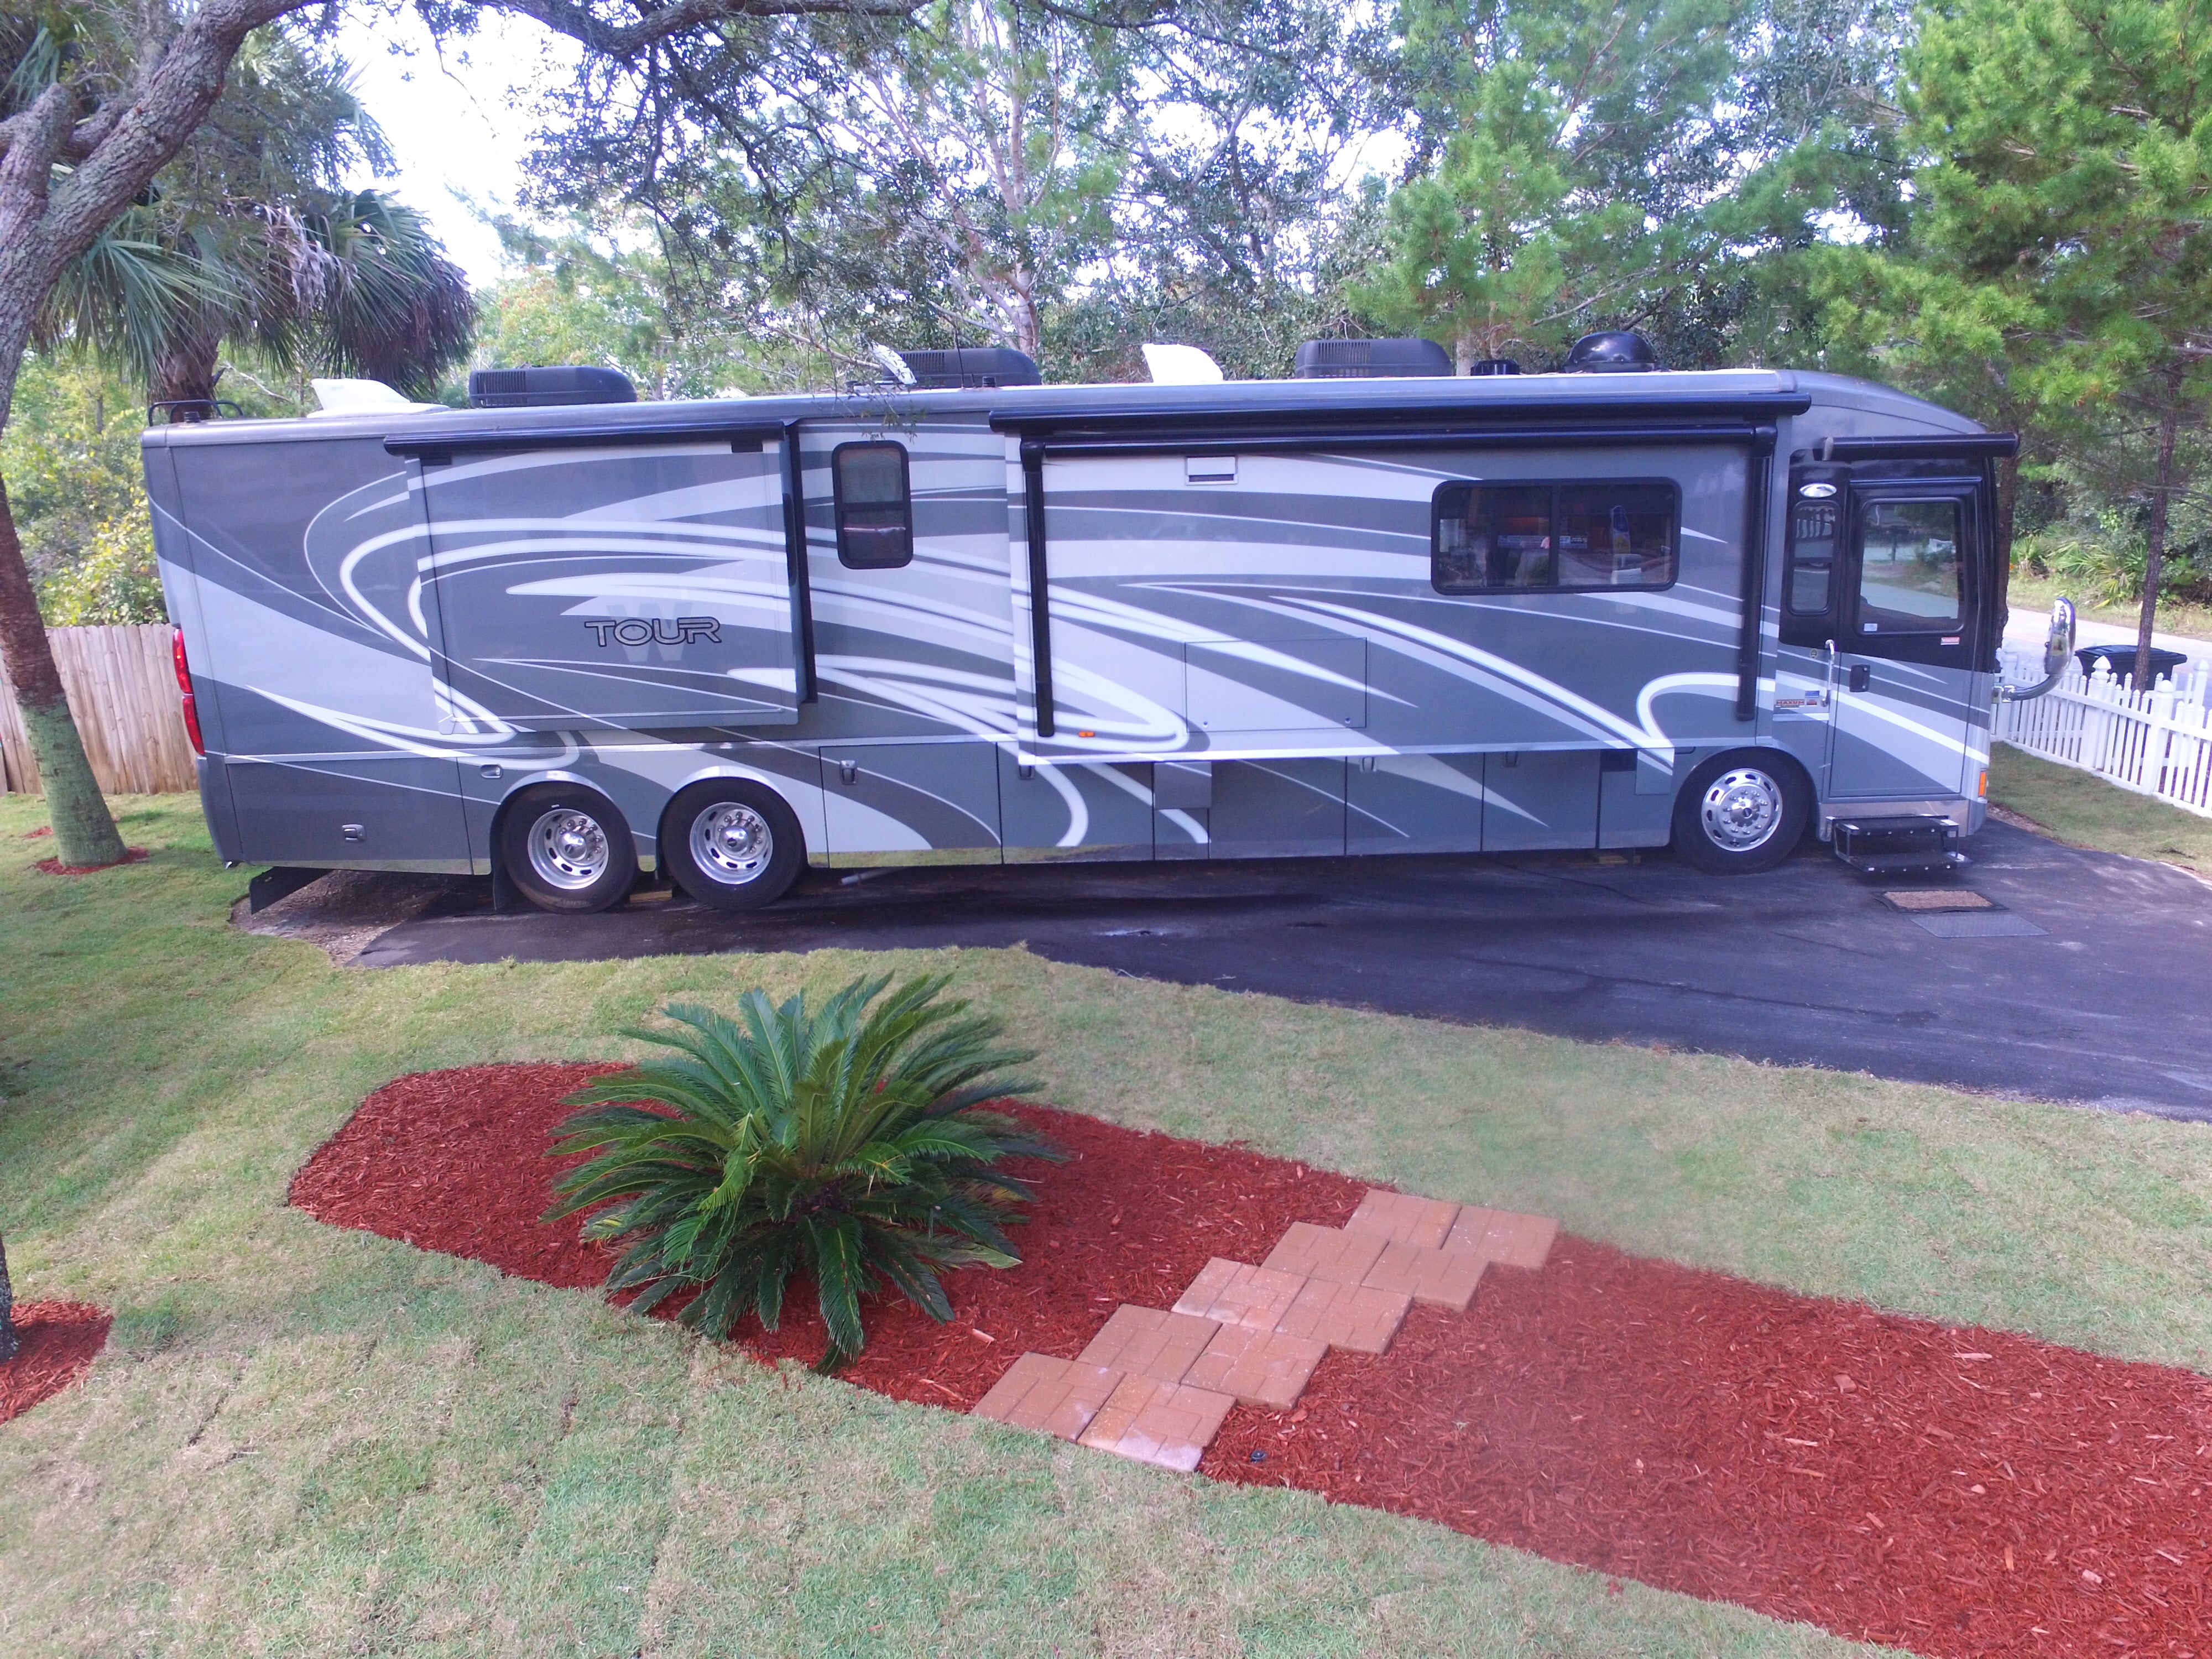 Camper submitted image from 3 Bedroom Vacation home, with Full hookup Camper pad.  - 1